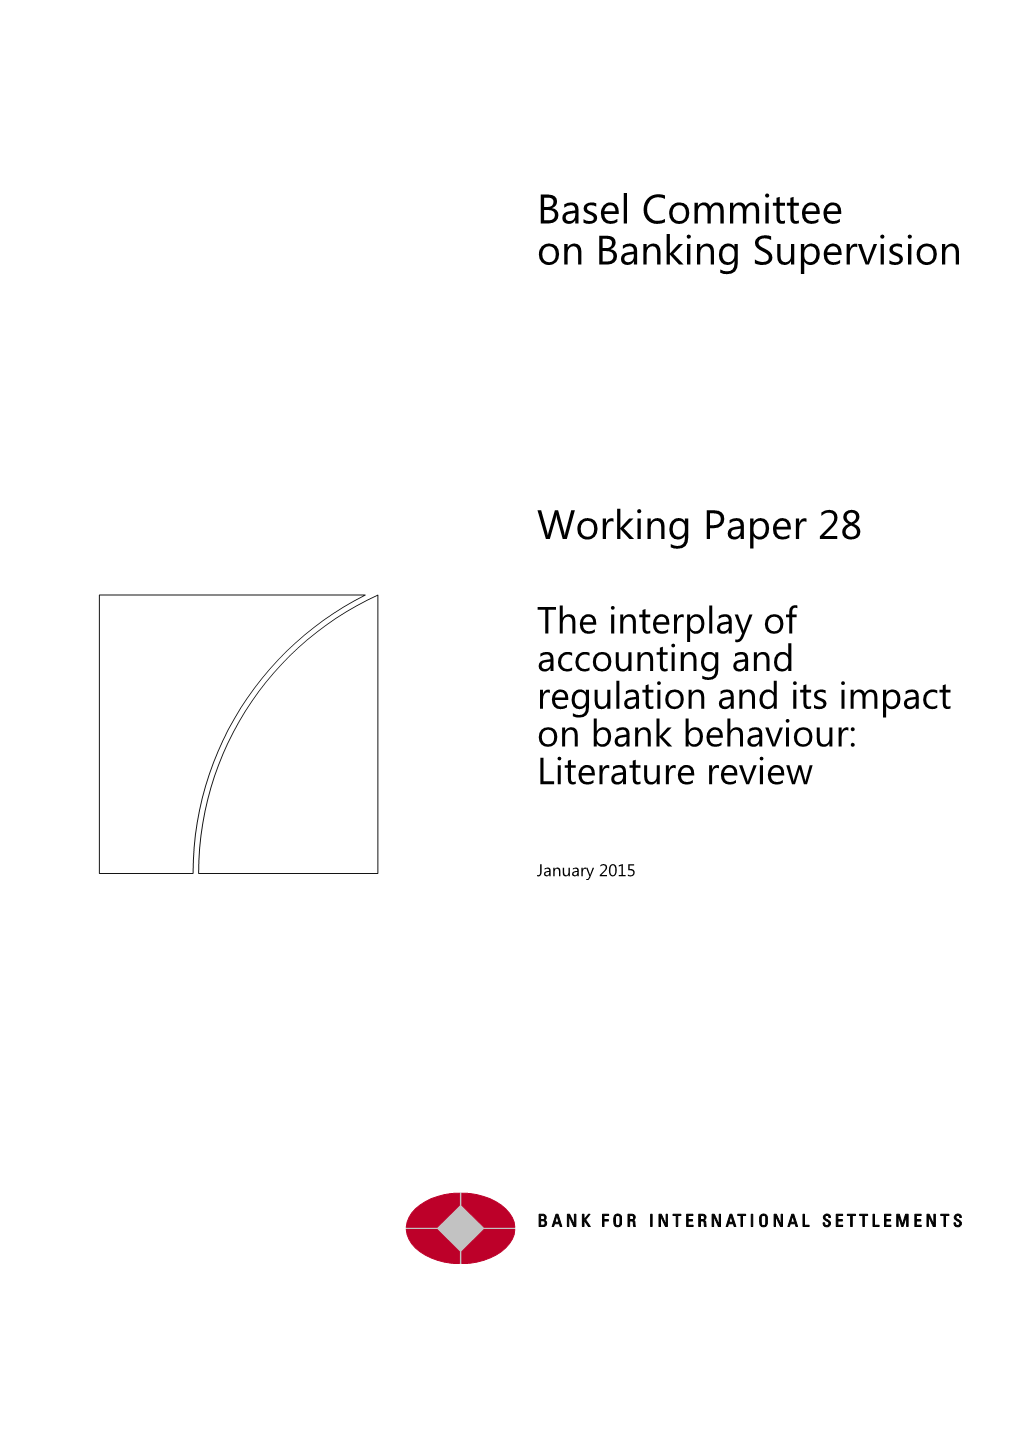 The Interplay of Accounting and Regulation and Its Impact on Bank Behaviour: Literature Review